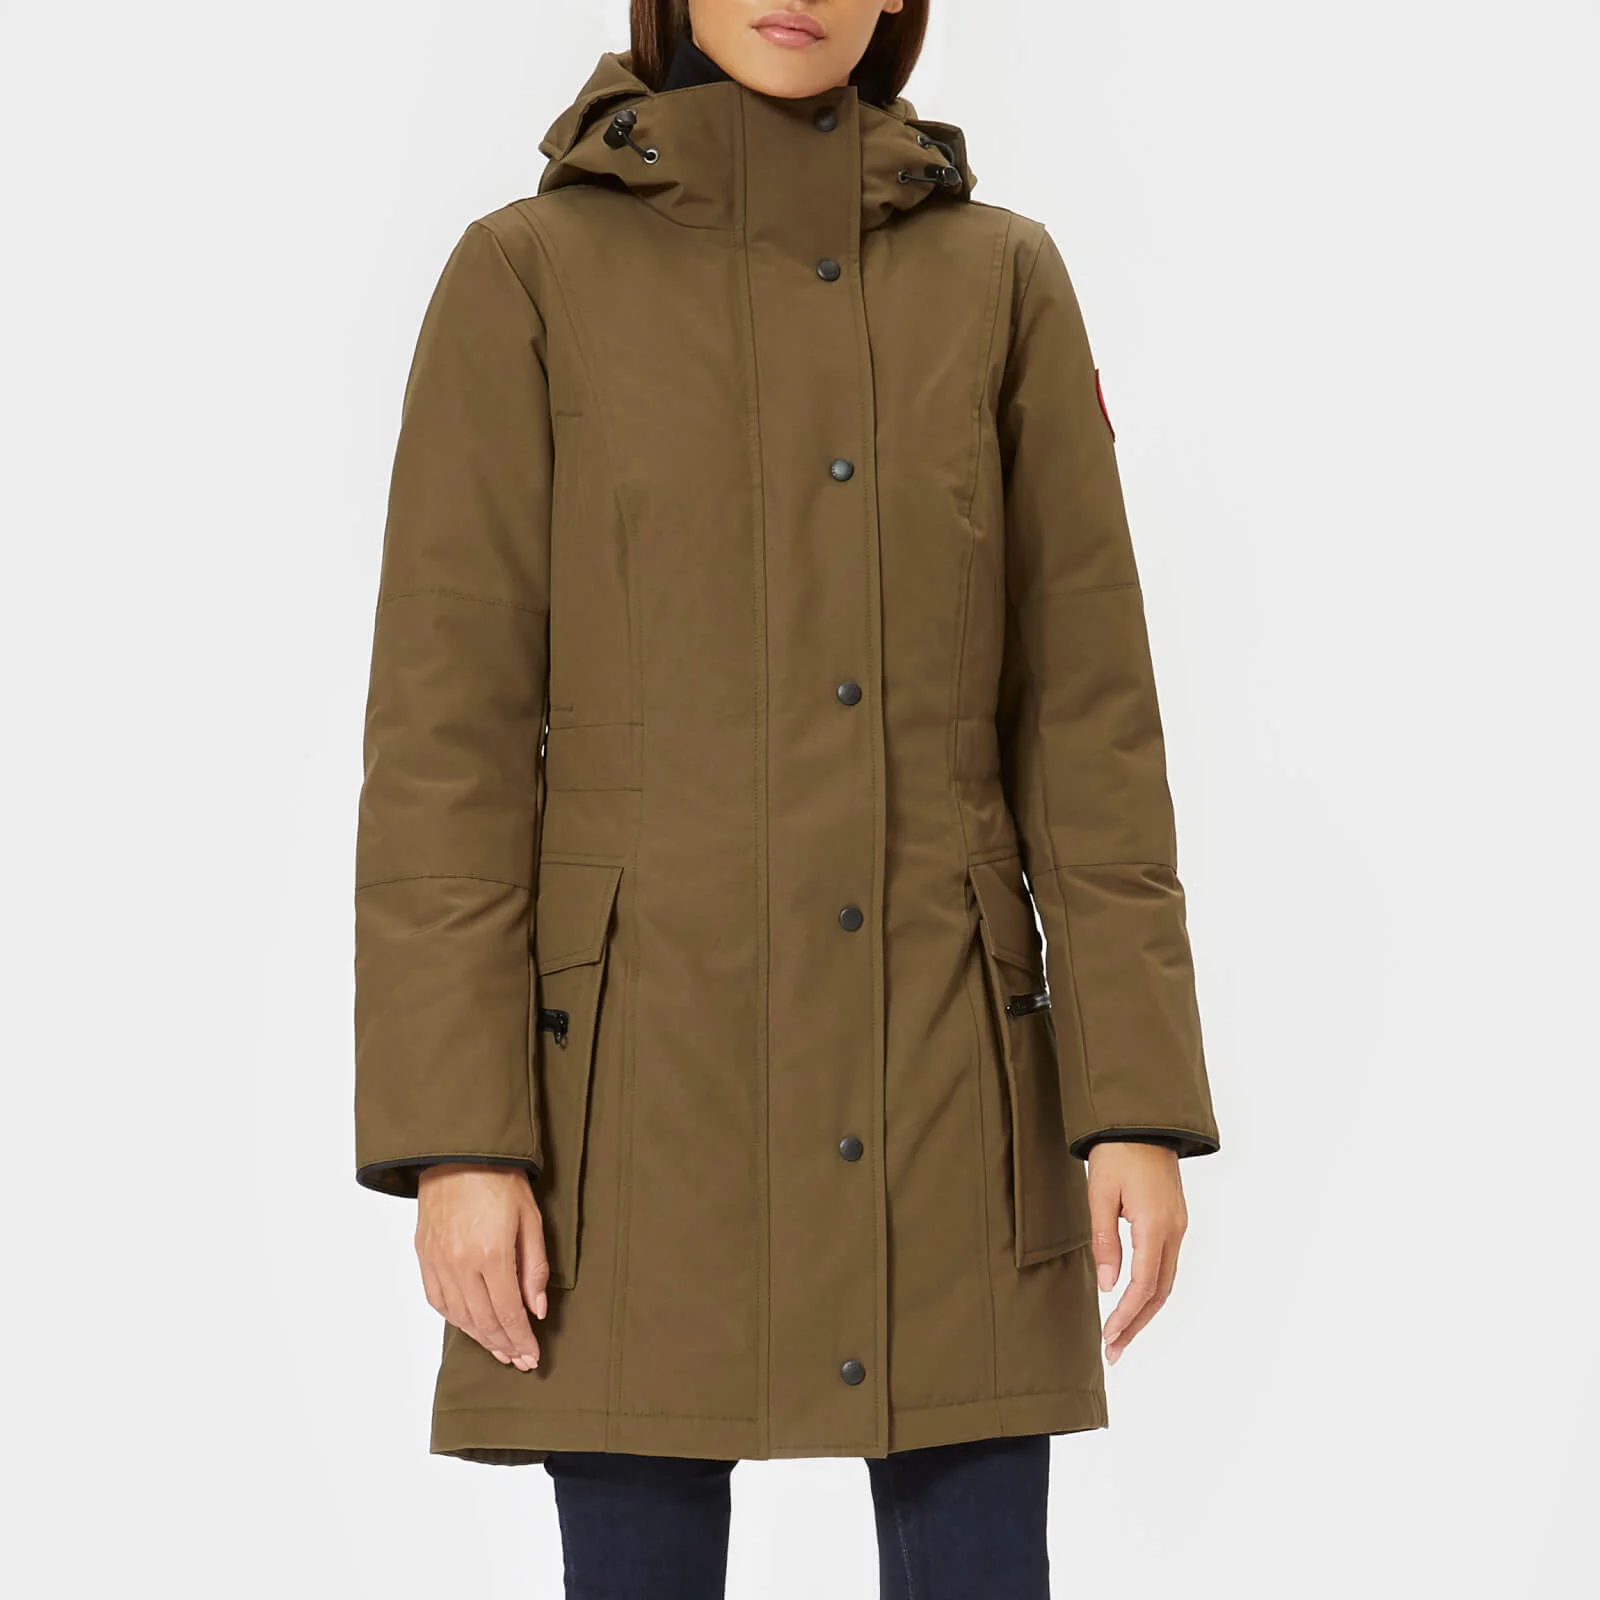 Canada Goose Women's Kinley Parka - Military Green Image 1